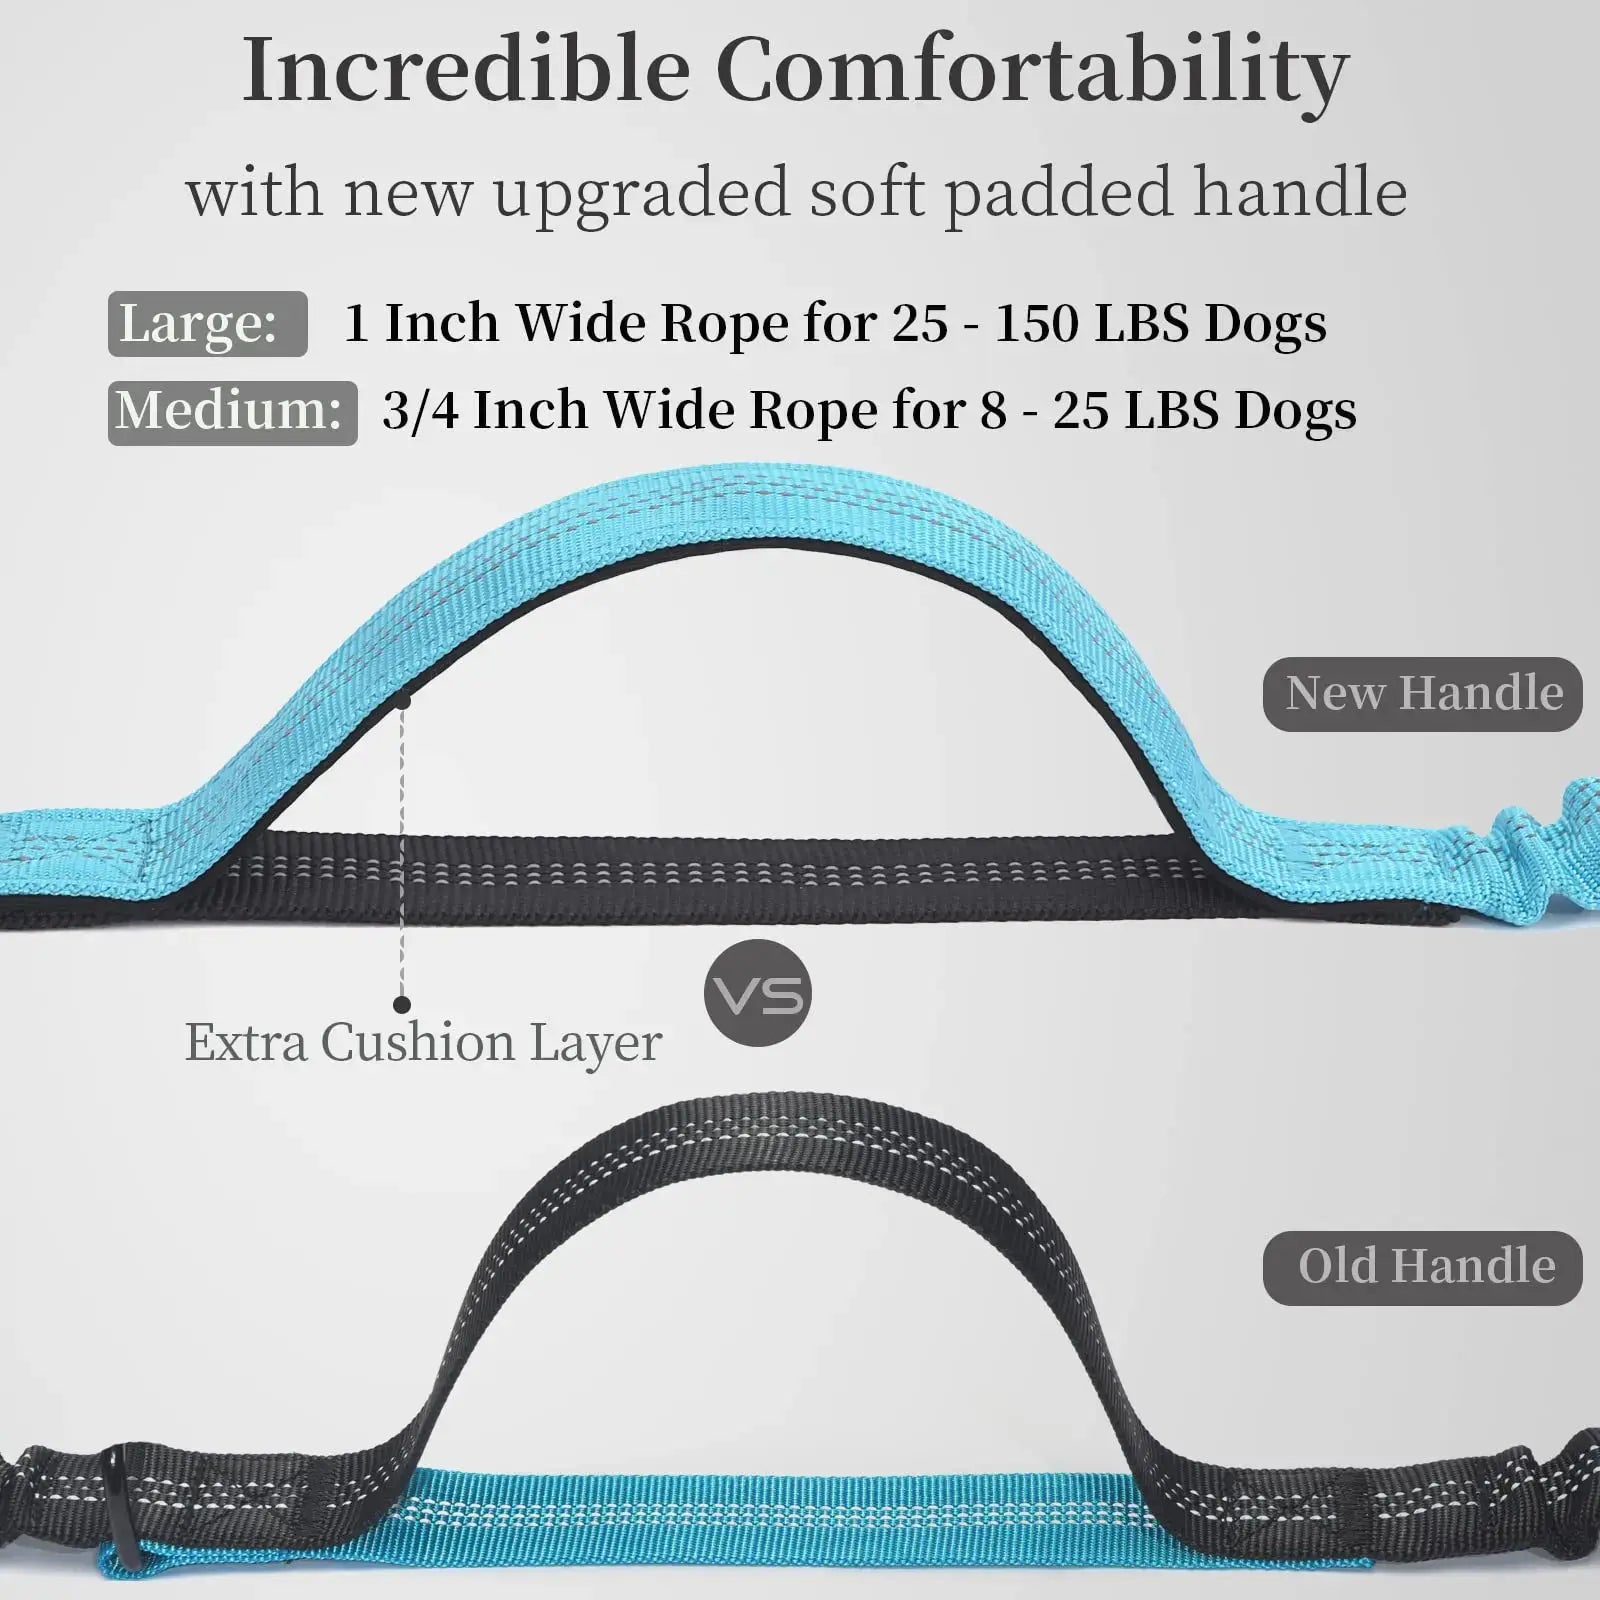 Canine Waist Pack - Ultimate Dog Walking Accessory